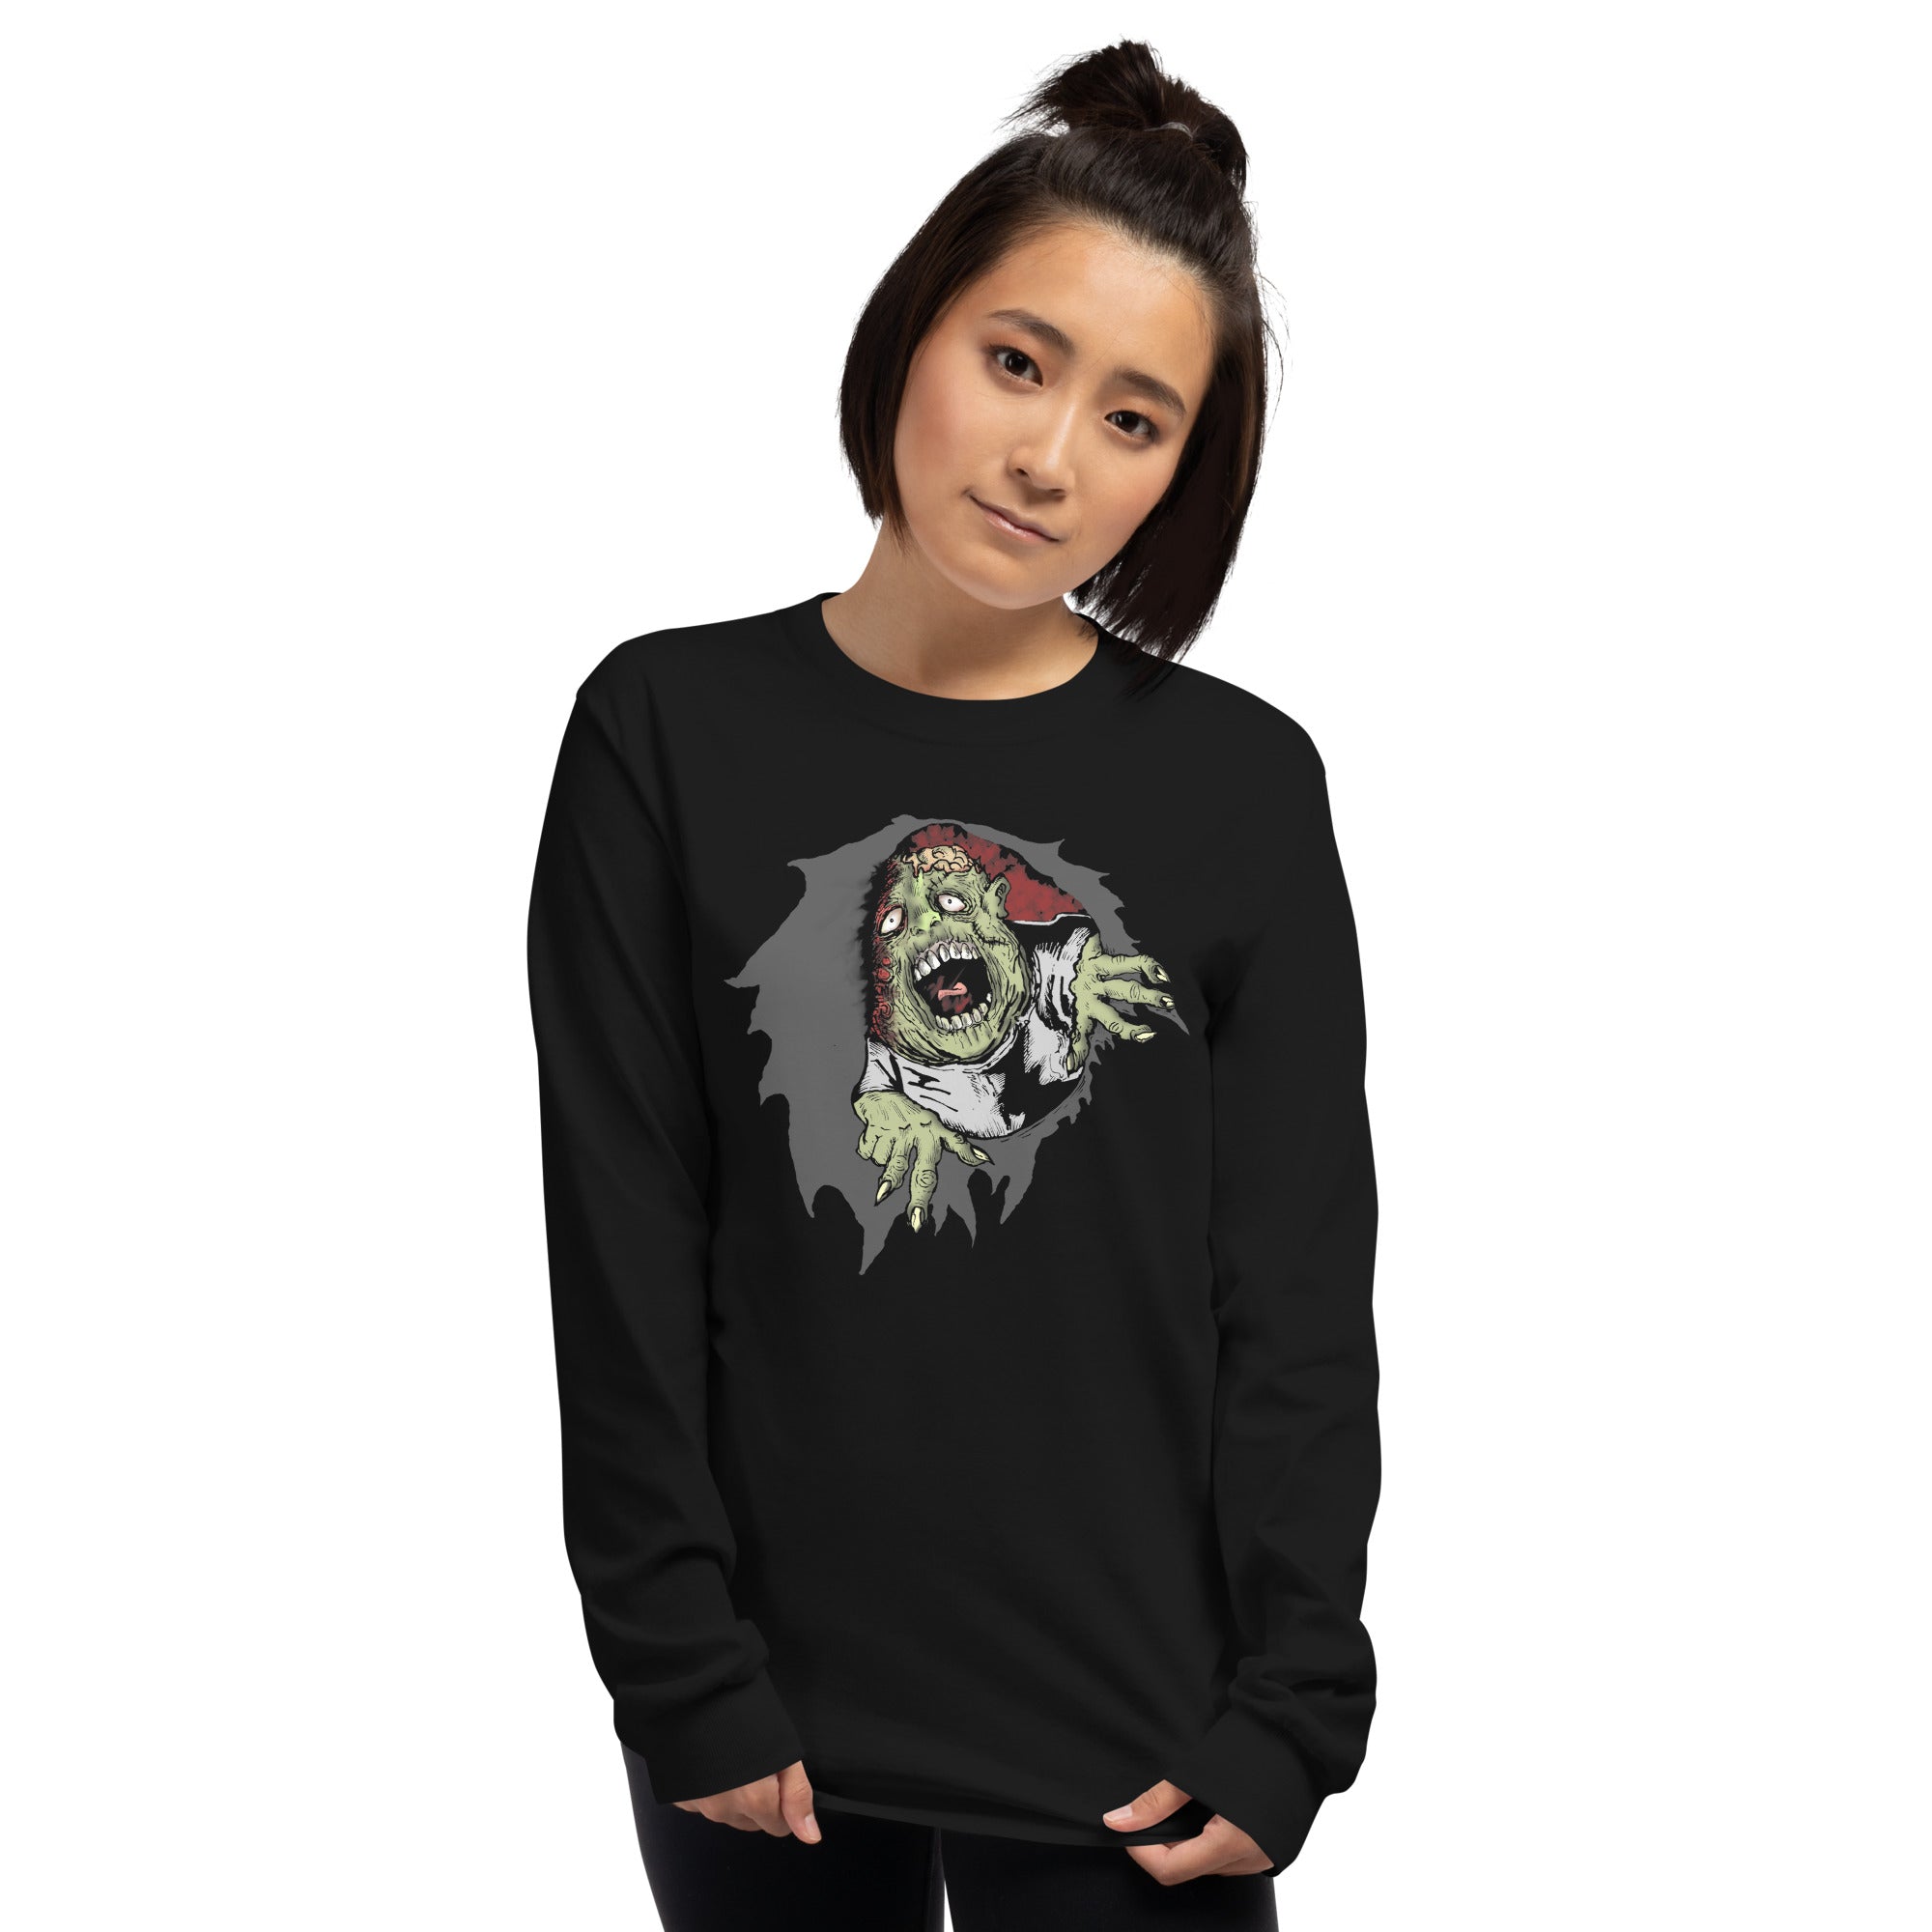 Flesh Eating Zombie Ripping Through Chest Horror Long Sleeve Shirt - Edge of Life Designs